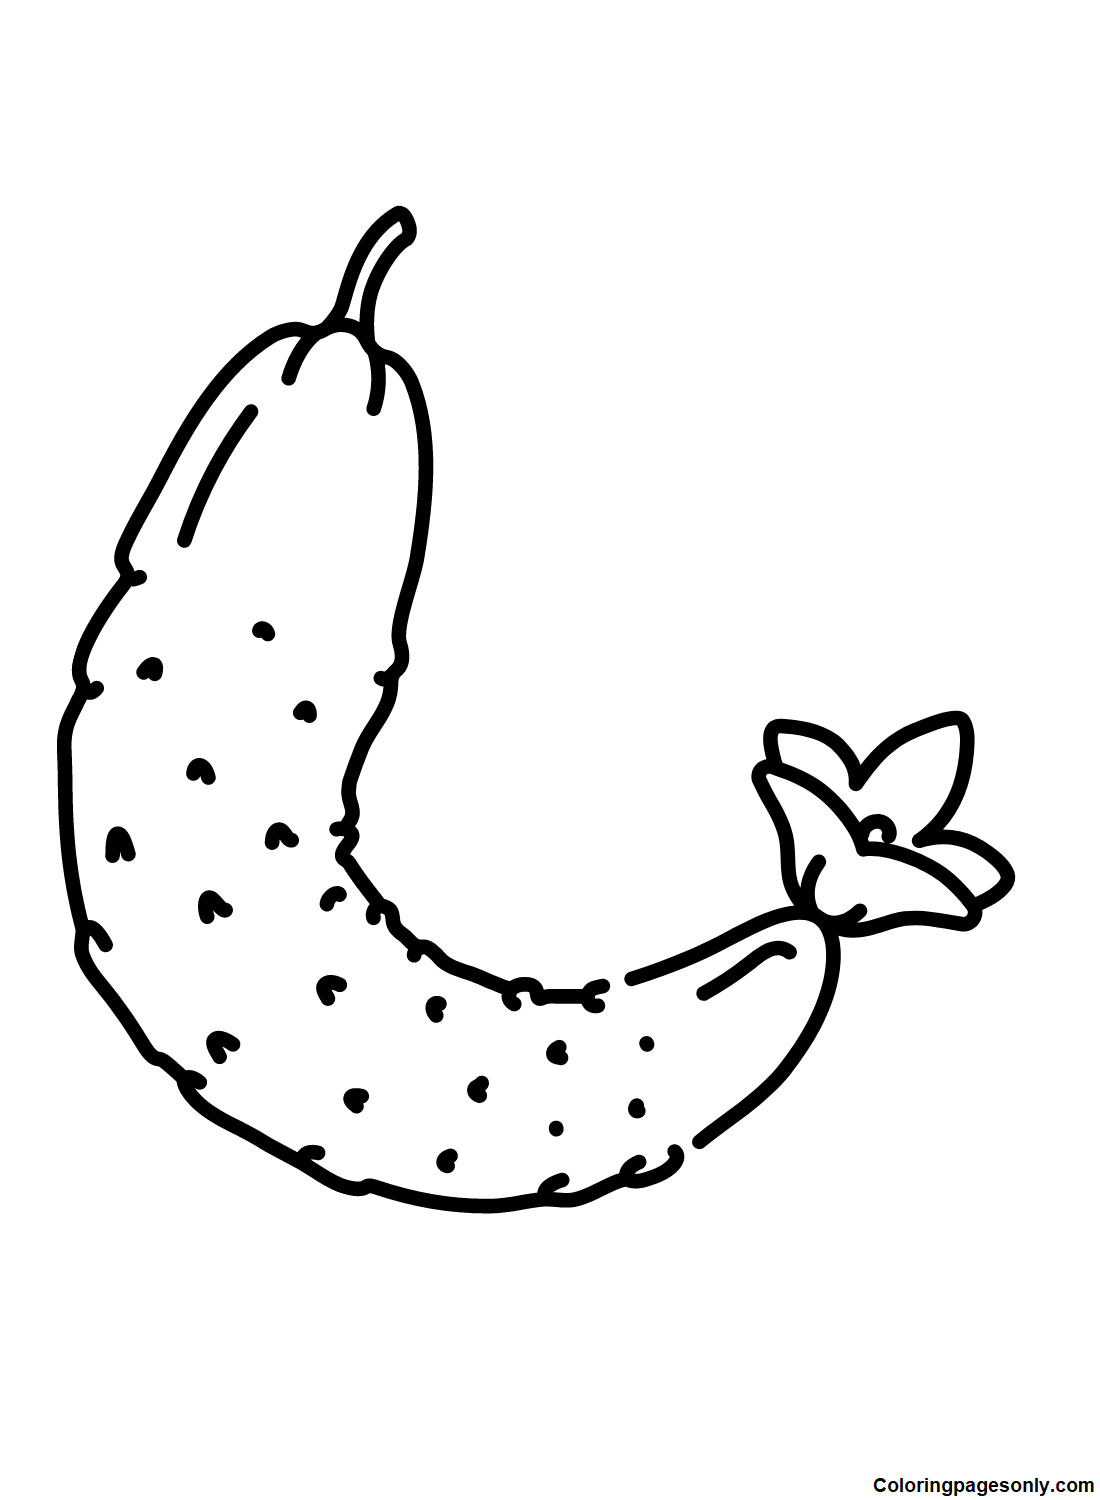 Cucumber Images Coloring Page